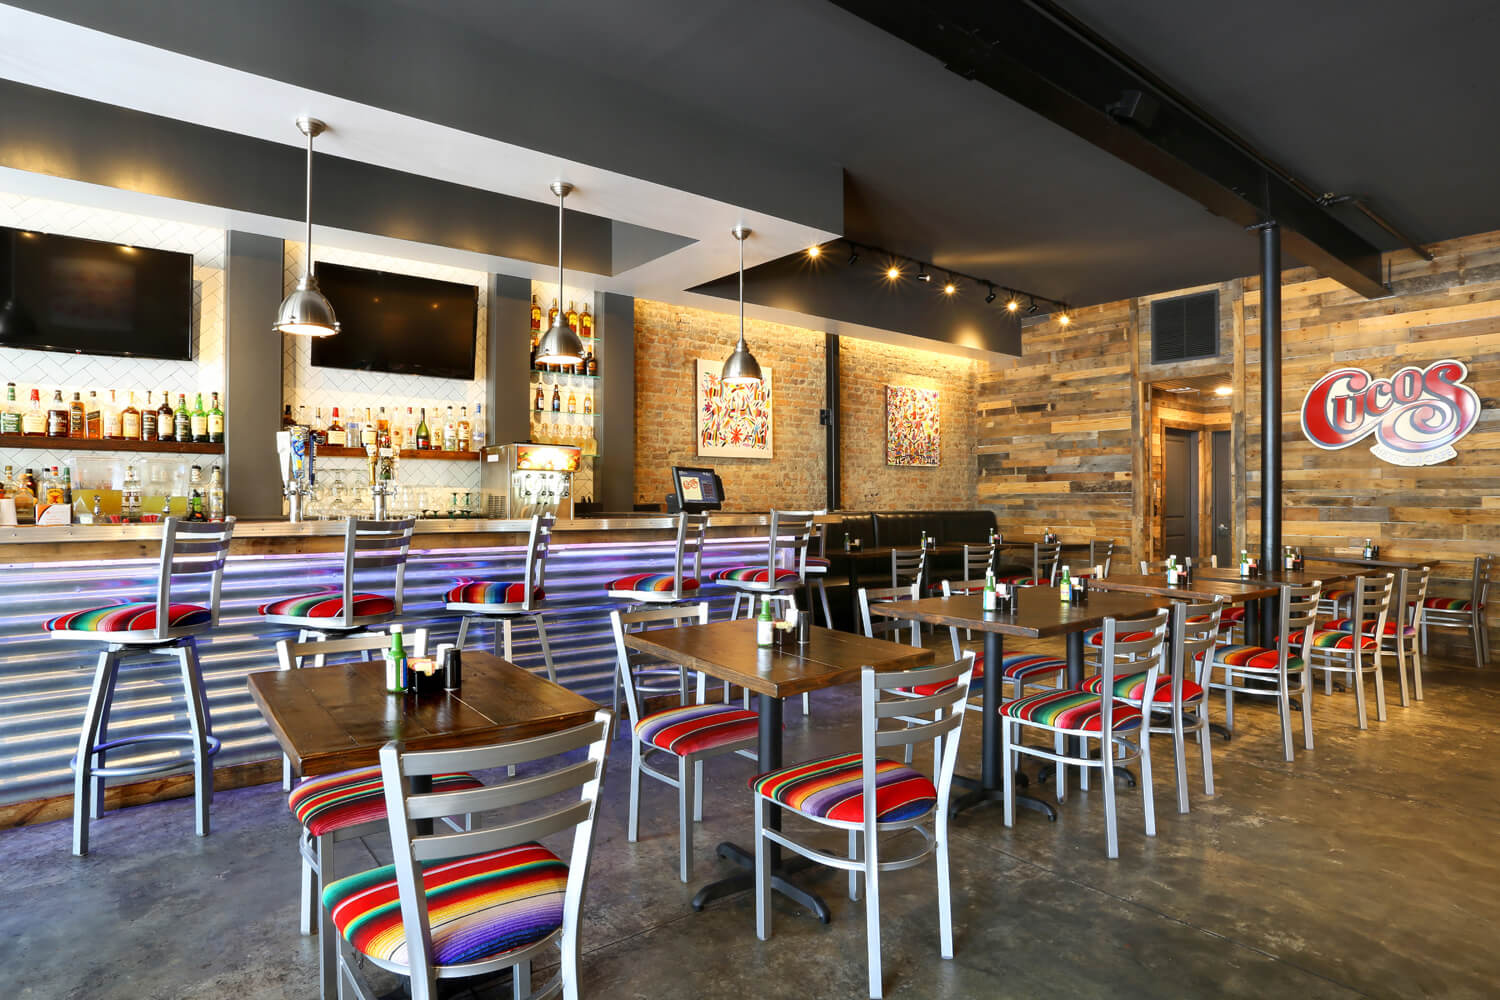 Cuco’s Mexican Café Restaurant Designed by Foshee Architecture – View of Seating Area